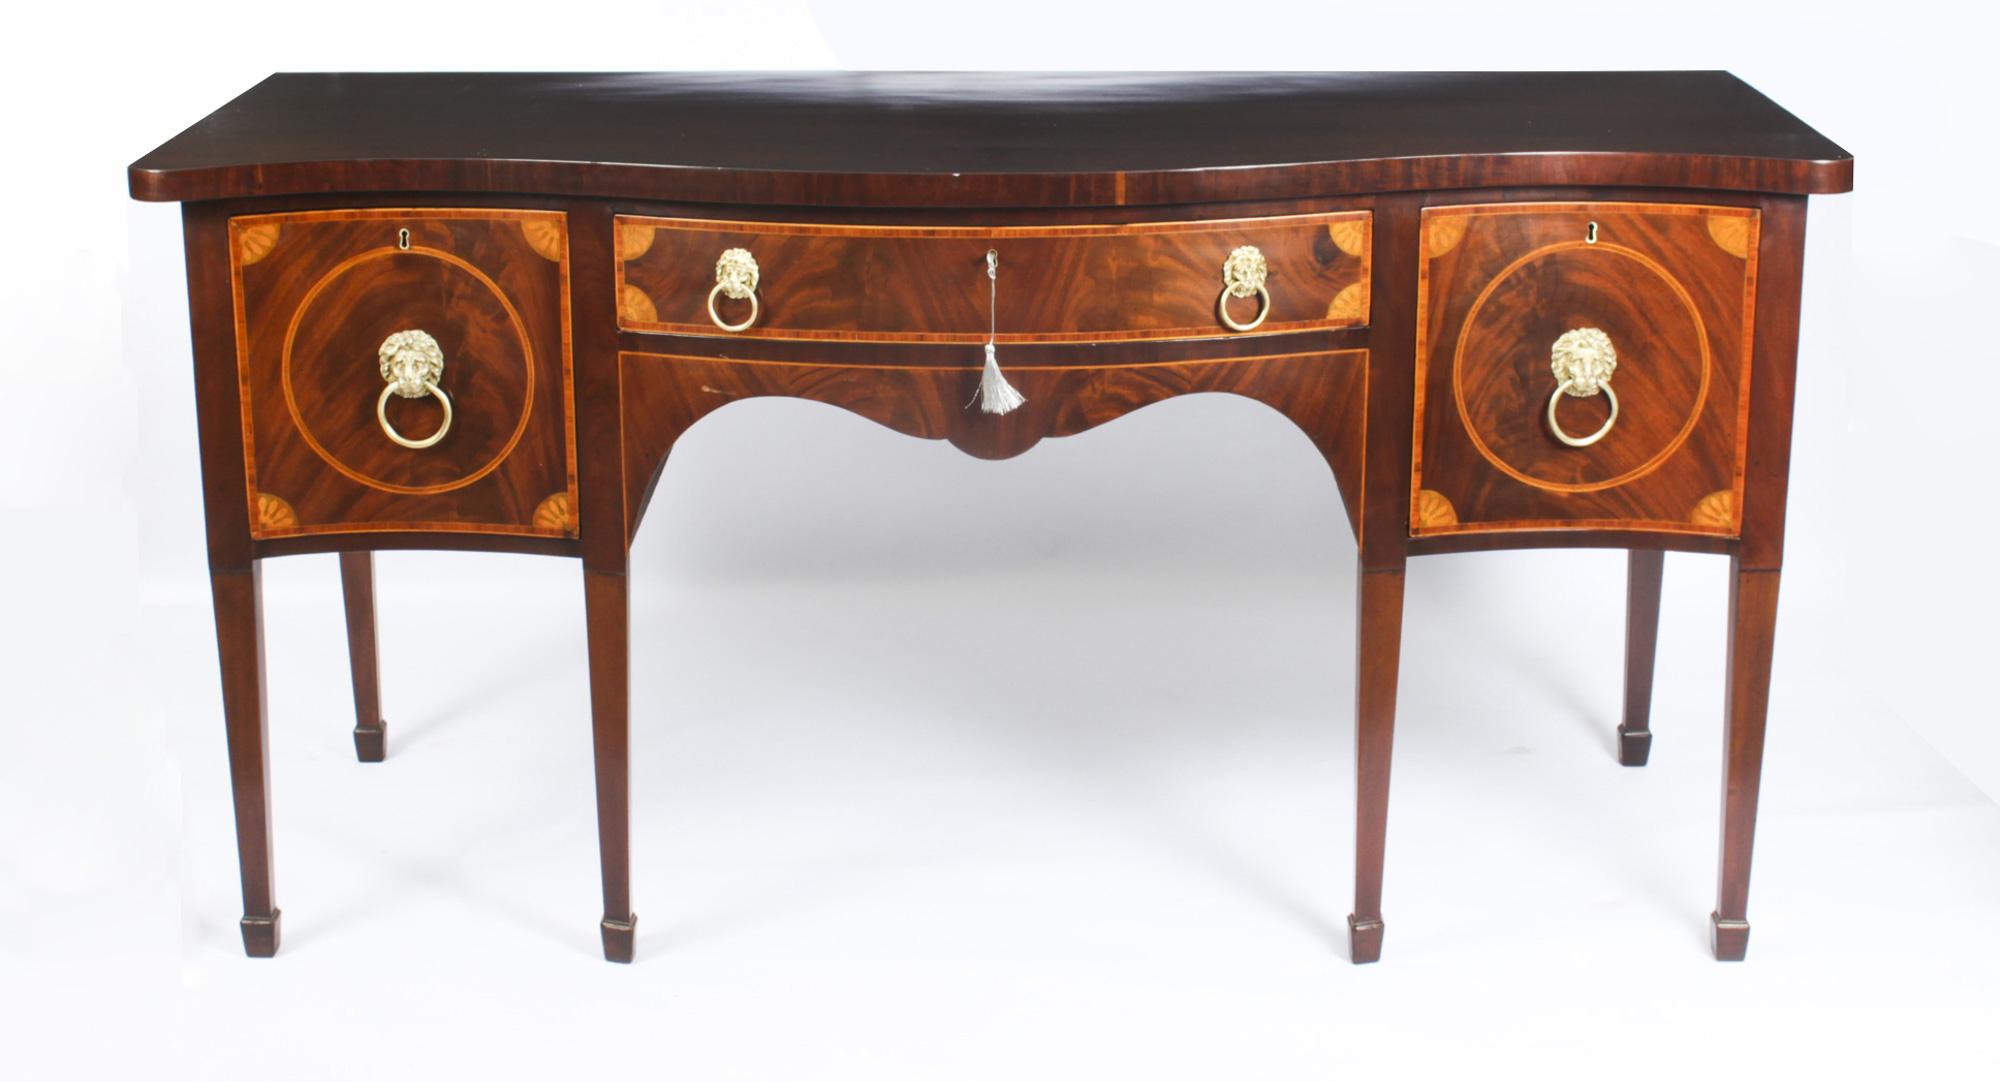 This is a superb antique George III inlaid flame mahogany serpentine sideboard, circa 1790 in date.
 
With wood banding and marquetry spandrels, the central frieze drawer flanked by deep drawers, the right side drawer with divisions for bottles.